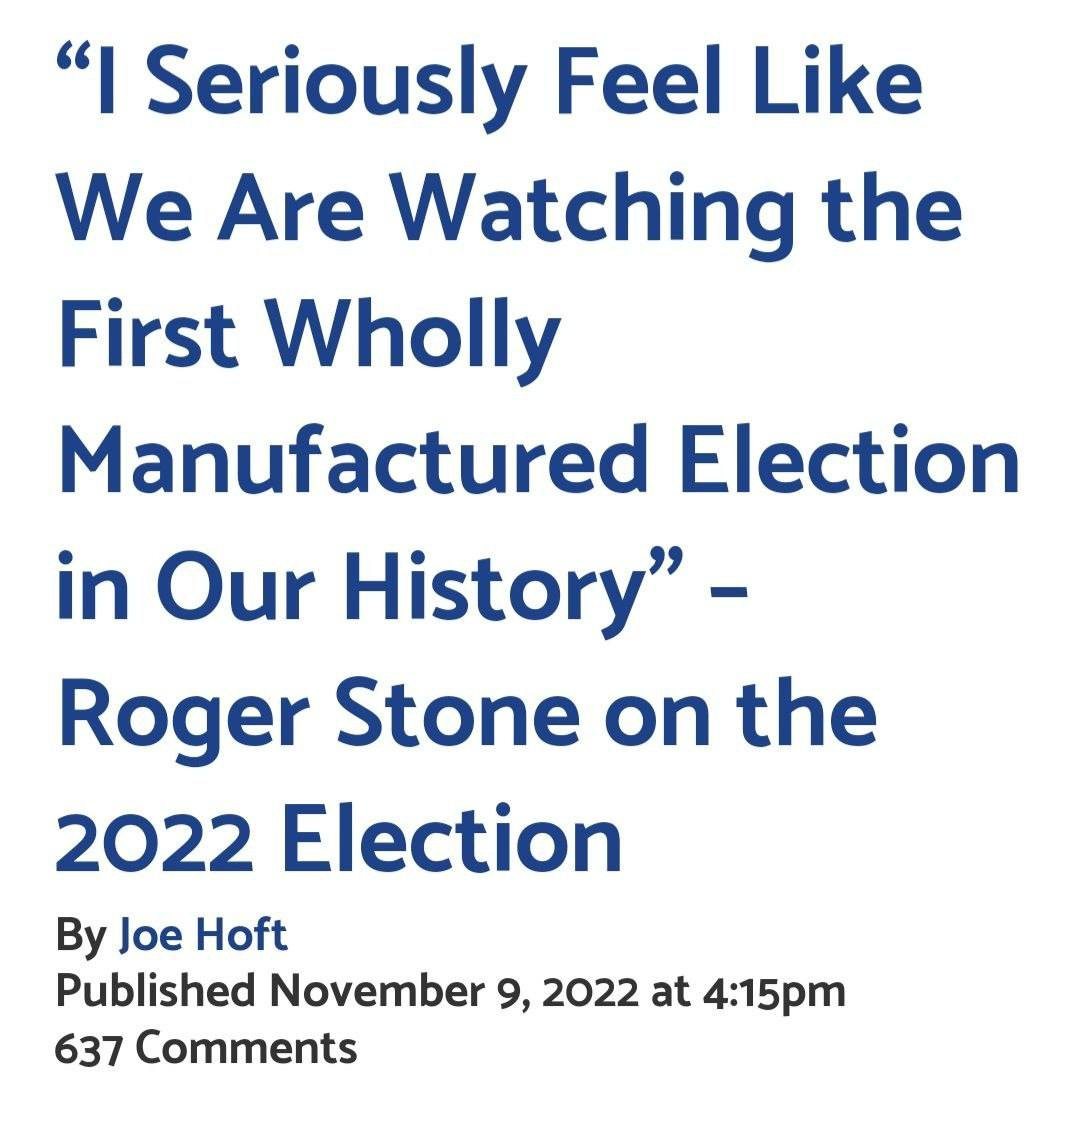 May be an image of text that says '"I Seriously Feel Like We Are Watching the First Wholly Manufactured Election in Our History"- Roger Stone on the 2022 Election By Joe Hoft Published November 9, 2022 at 4:15pm 637 Comments'